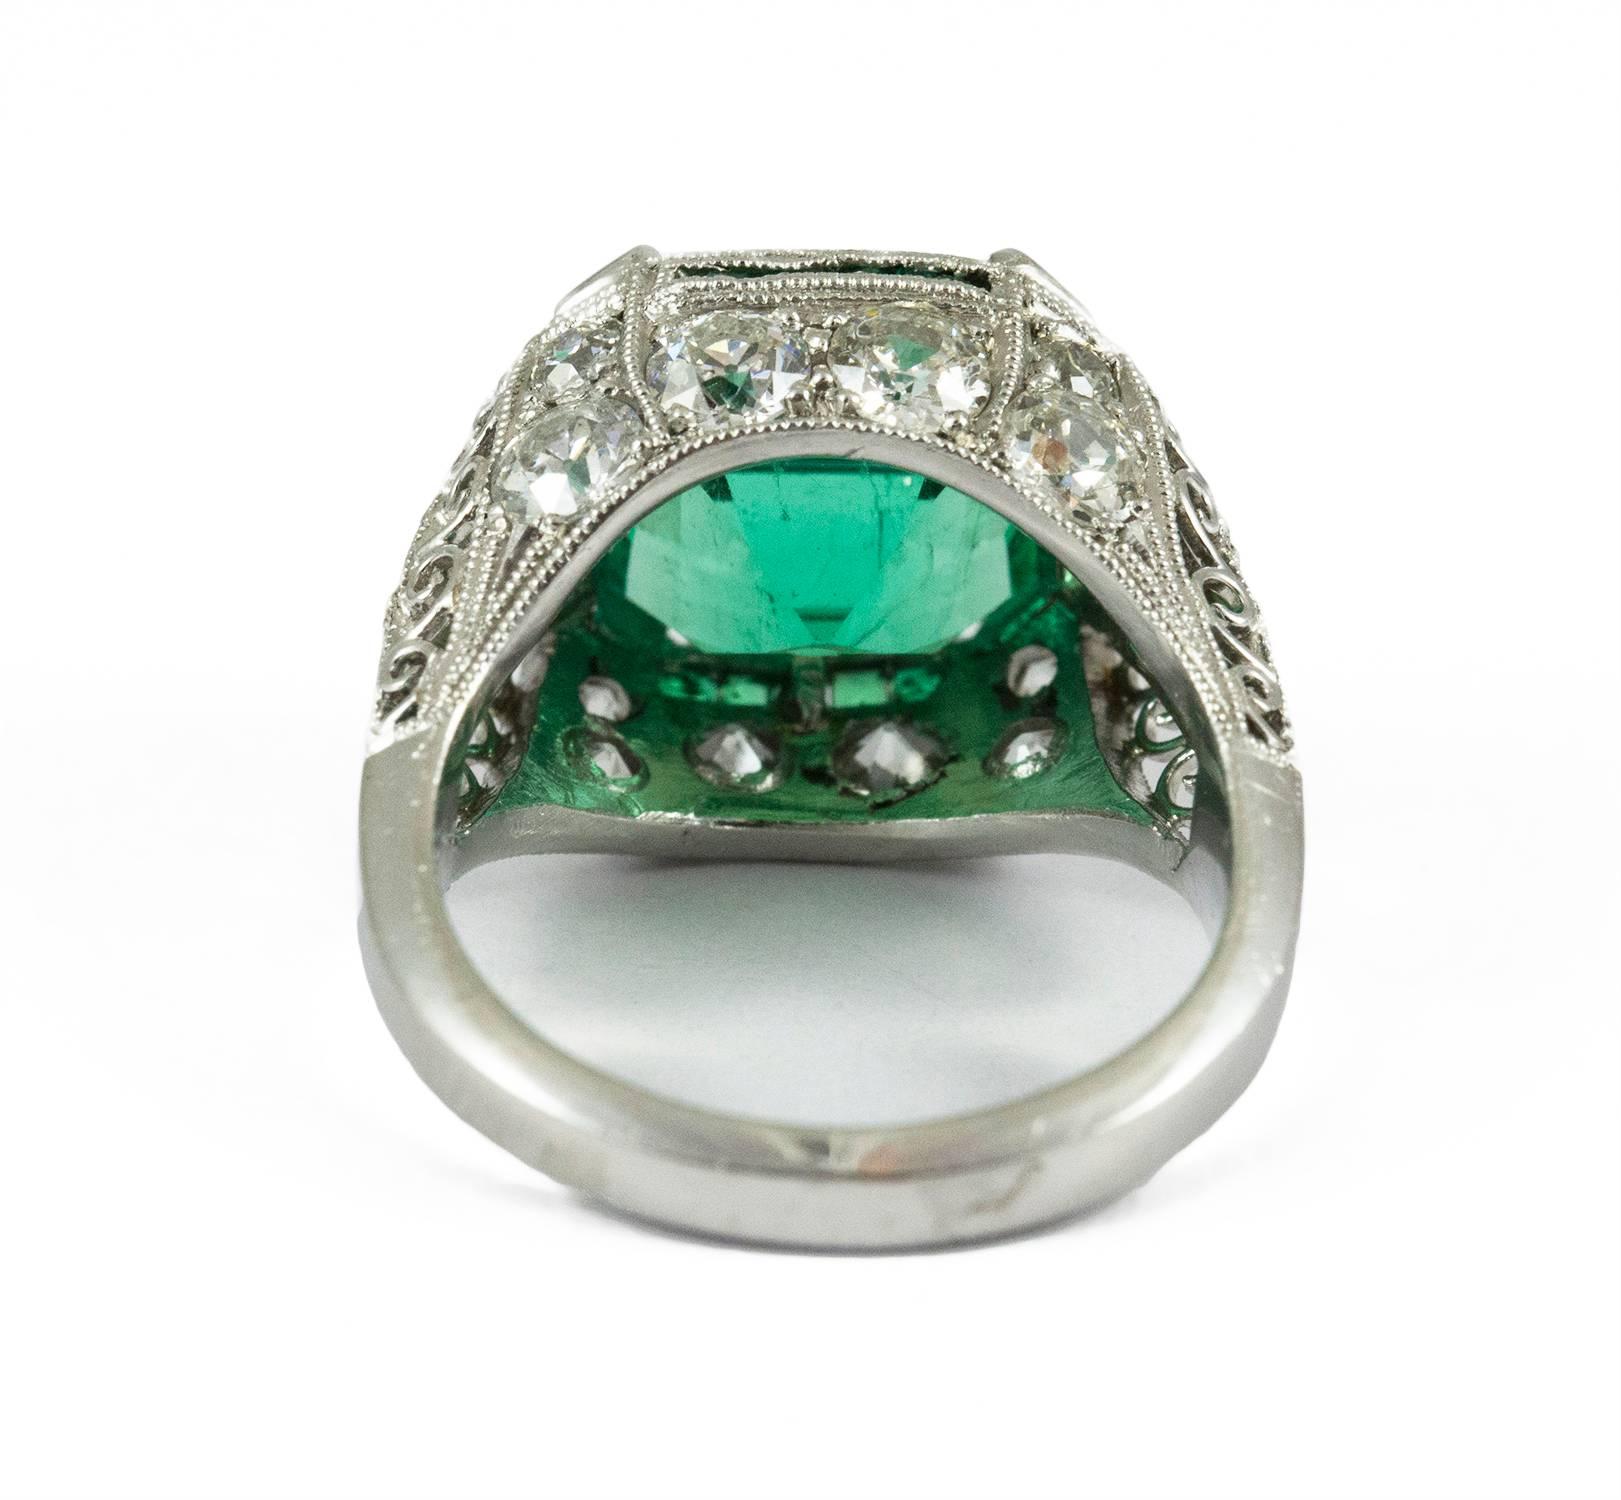 This ravishing Art Deco Emerald ring is set in platinum with a bright 6.48 rectangular mixed cut emerald. The central stone is embellished by eighteen old European cut bead set diamonds. (F-G-H, VS2-I1) Additionally there are twenty one delicate